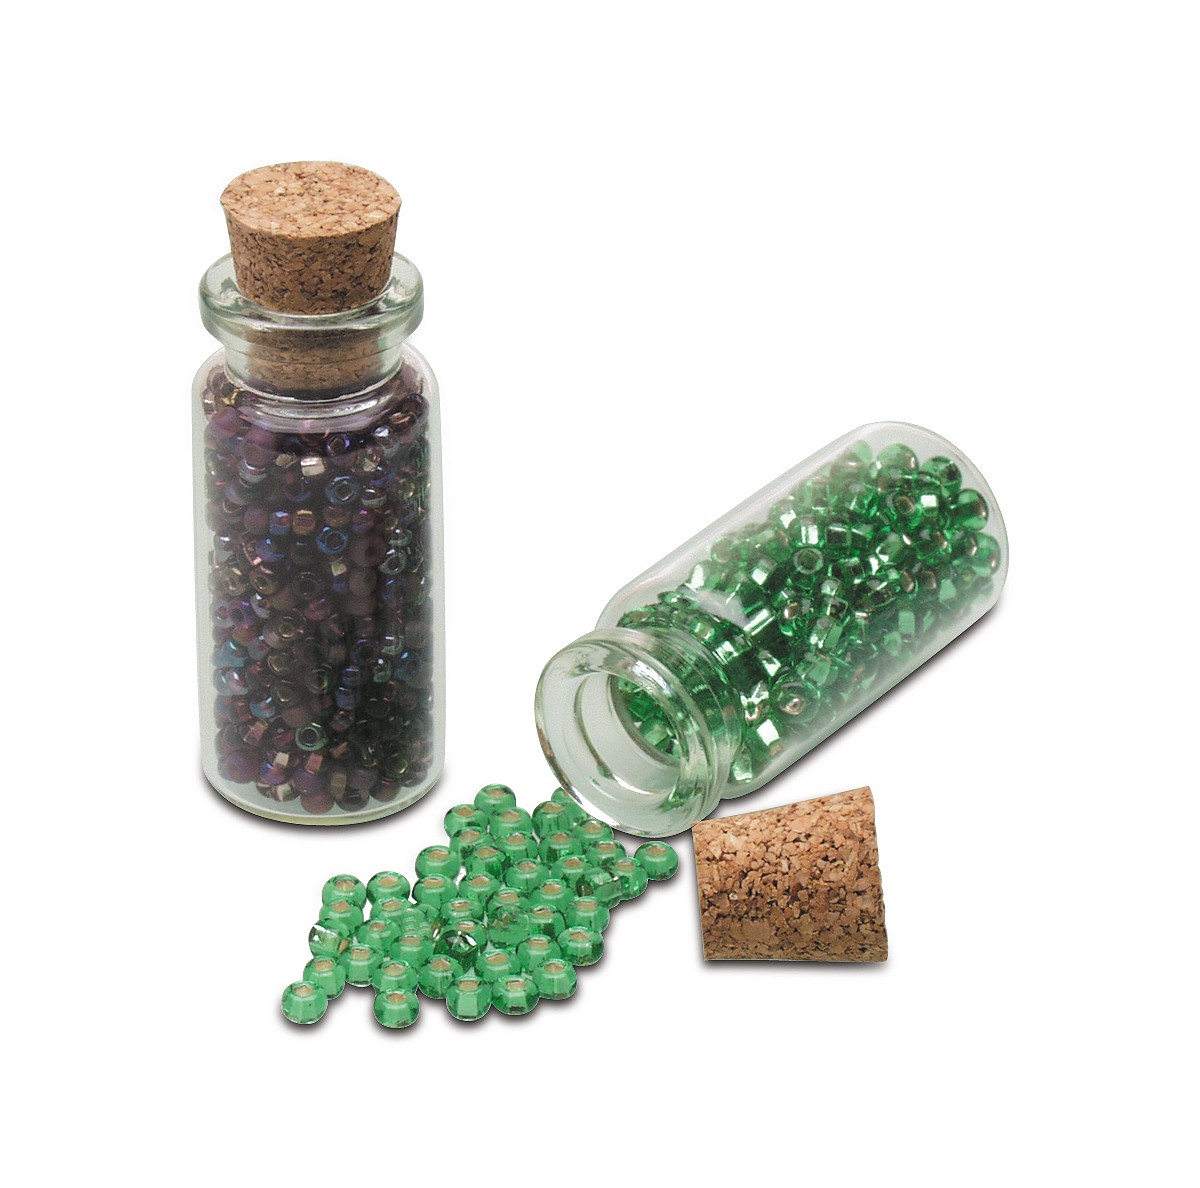 Box of 50 Glass Bead Bottles with Cork 